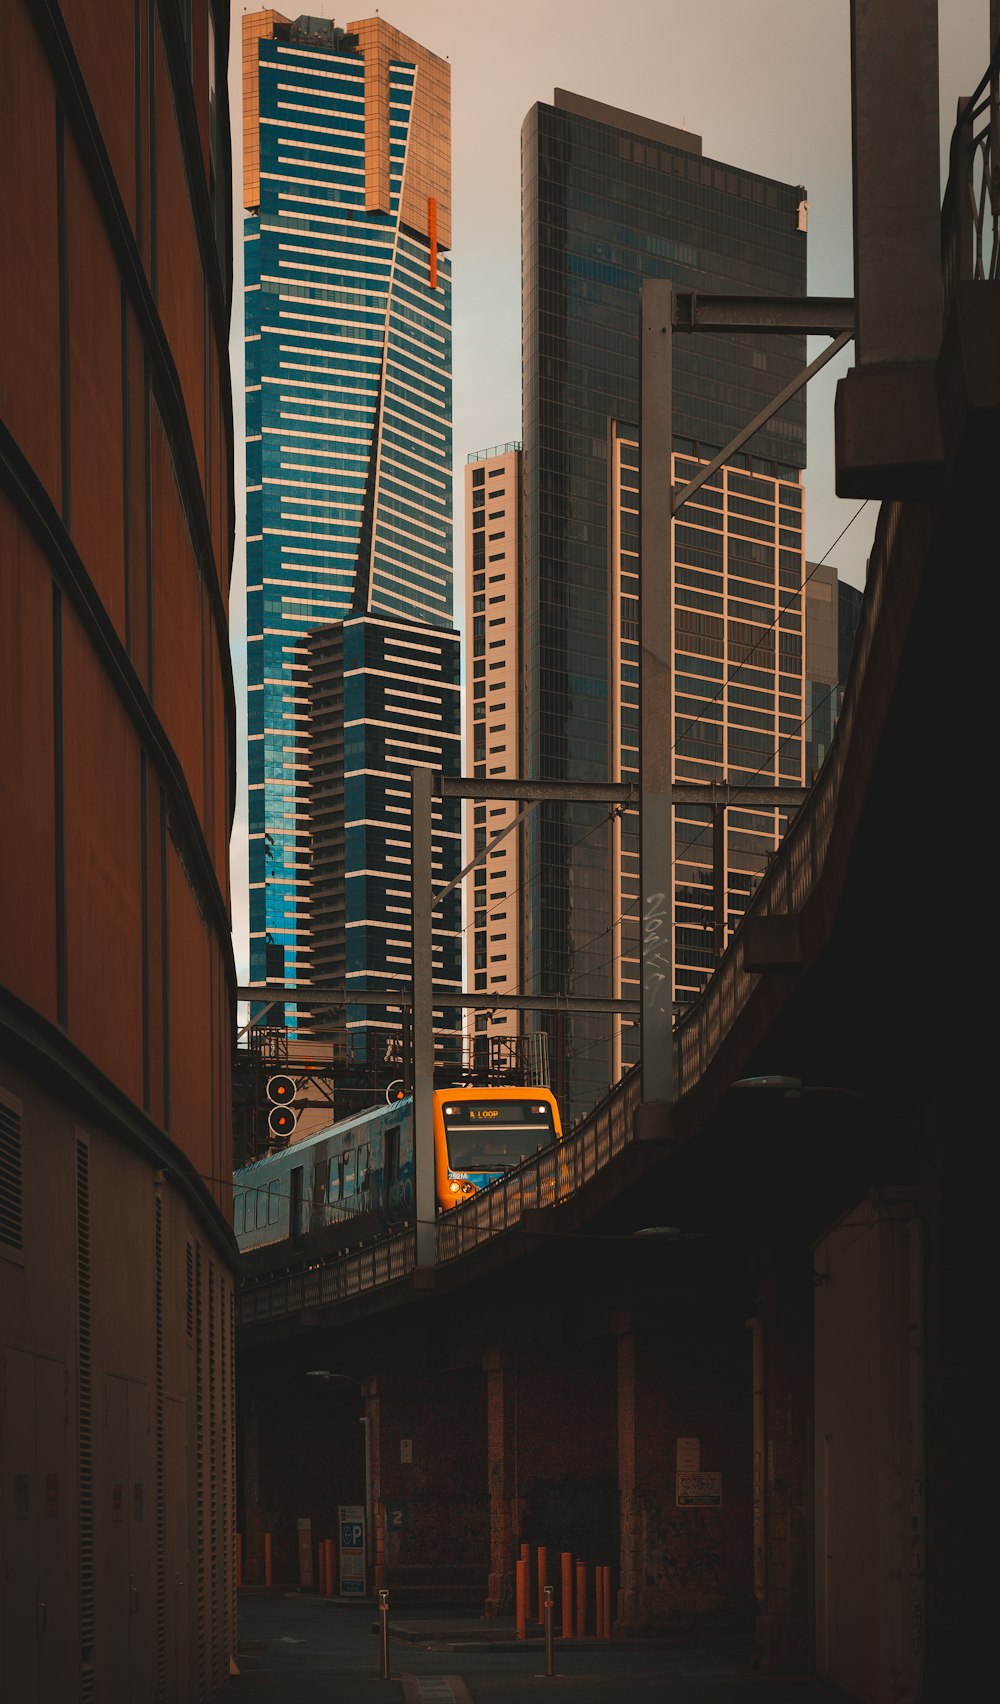 black and yellow train in the city during daytime